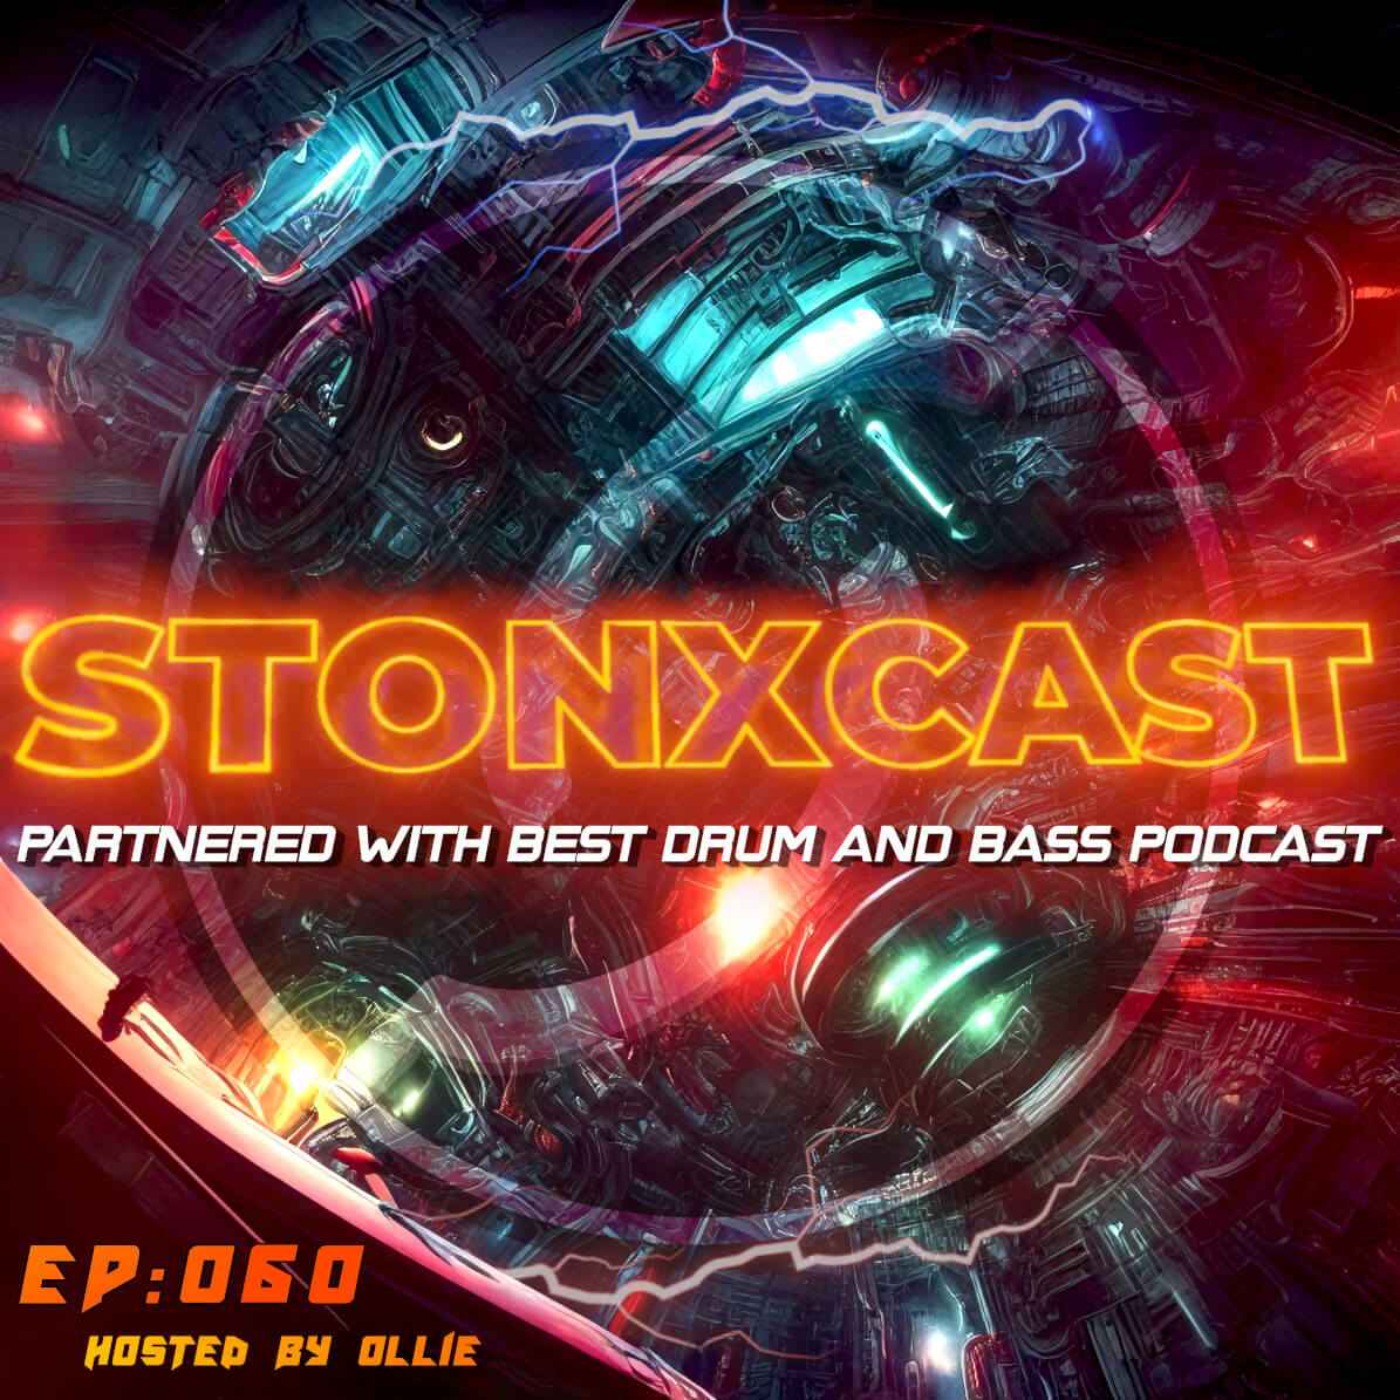 Stonxcast EP:060 - Hosted by Ollie Artwork